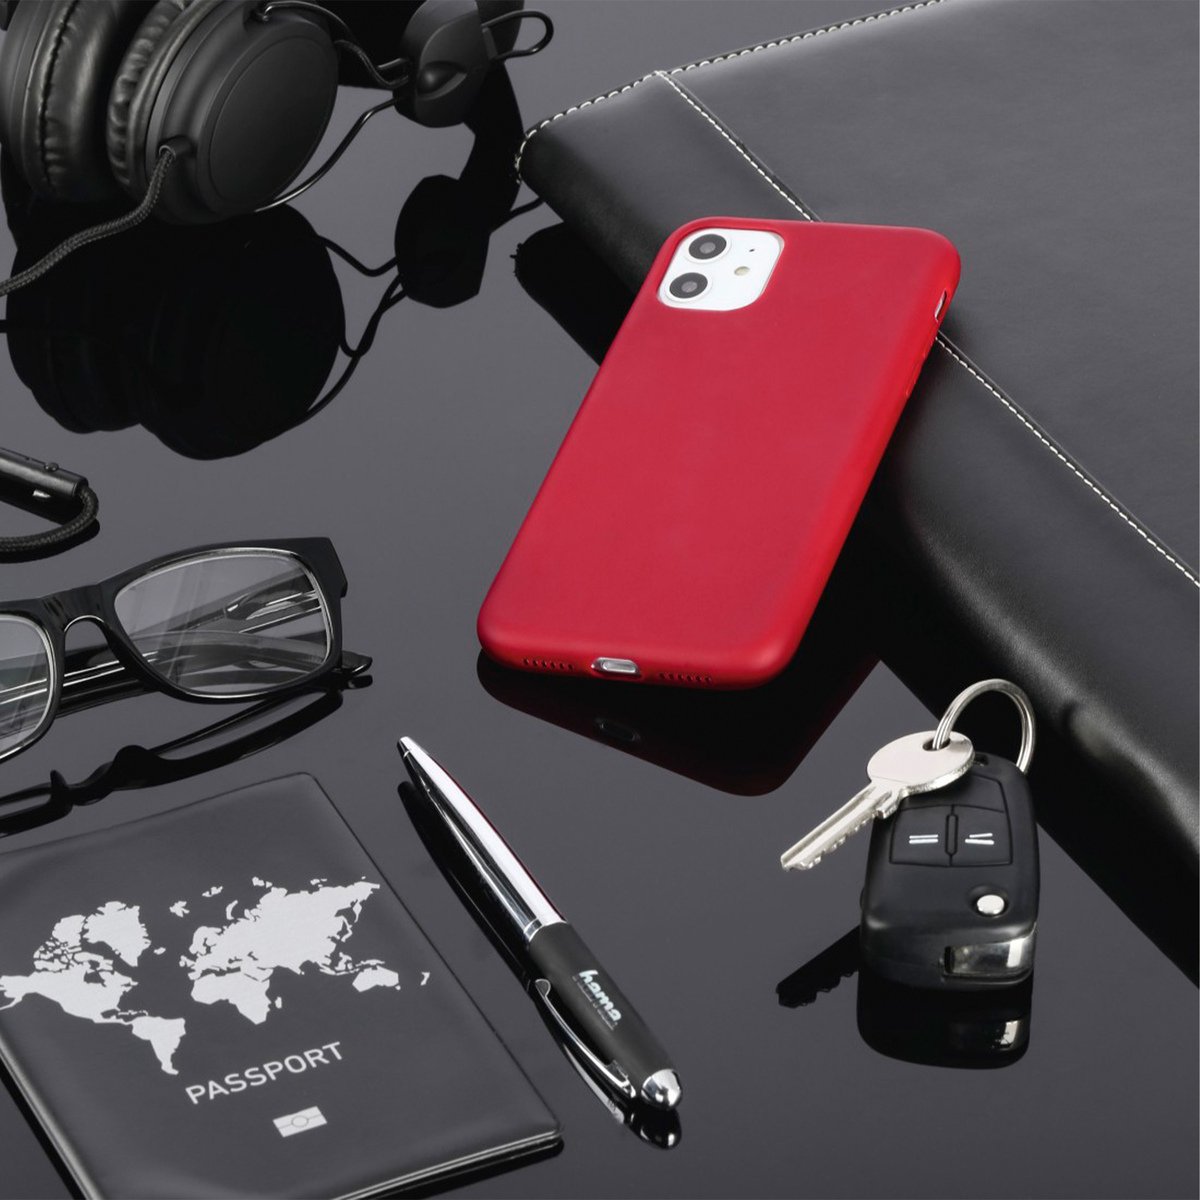 Hama Finest Feel Cover for Apple iPhone 12 Pro Max,Red (188842)